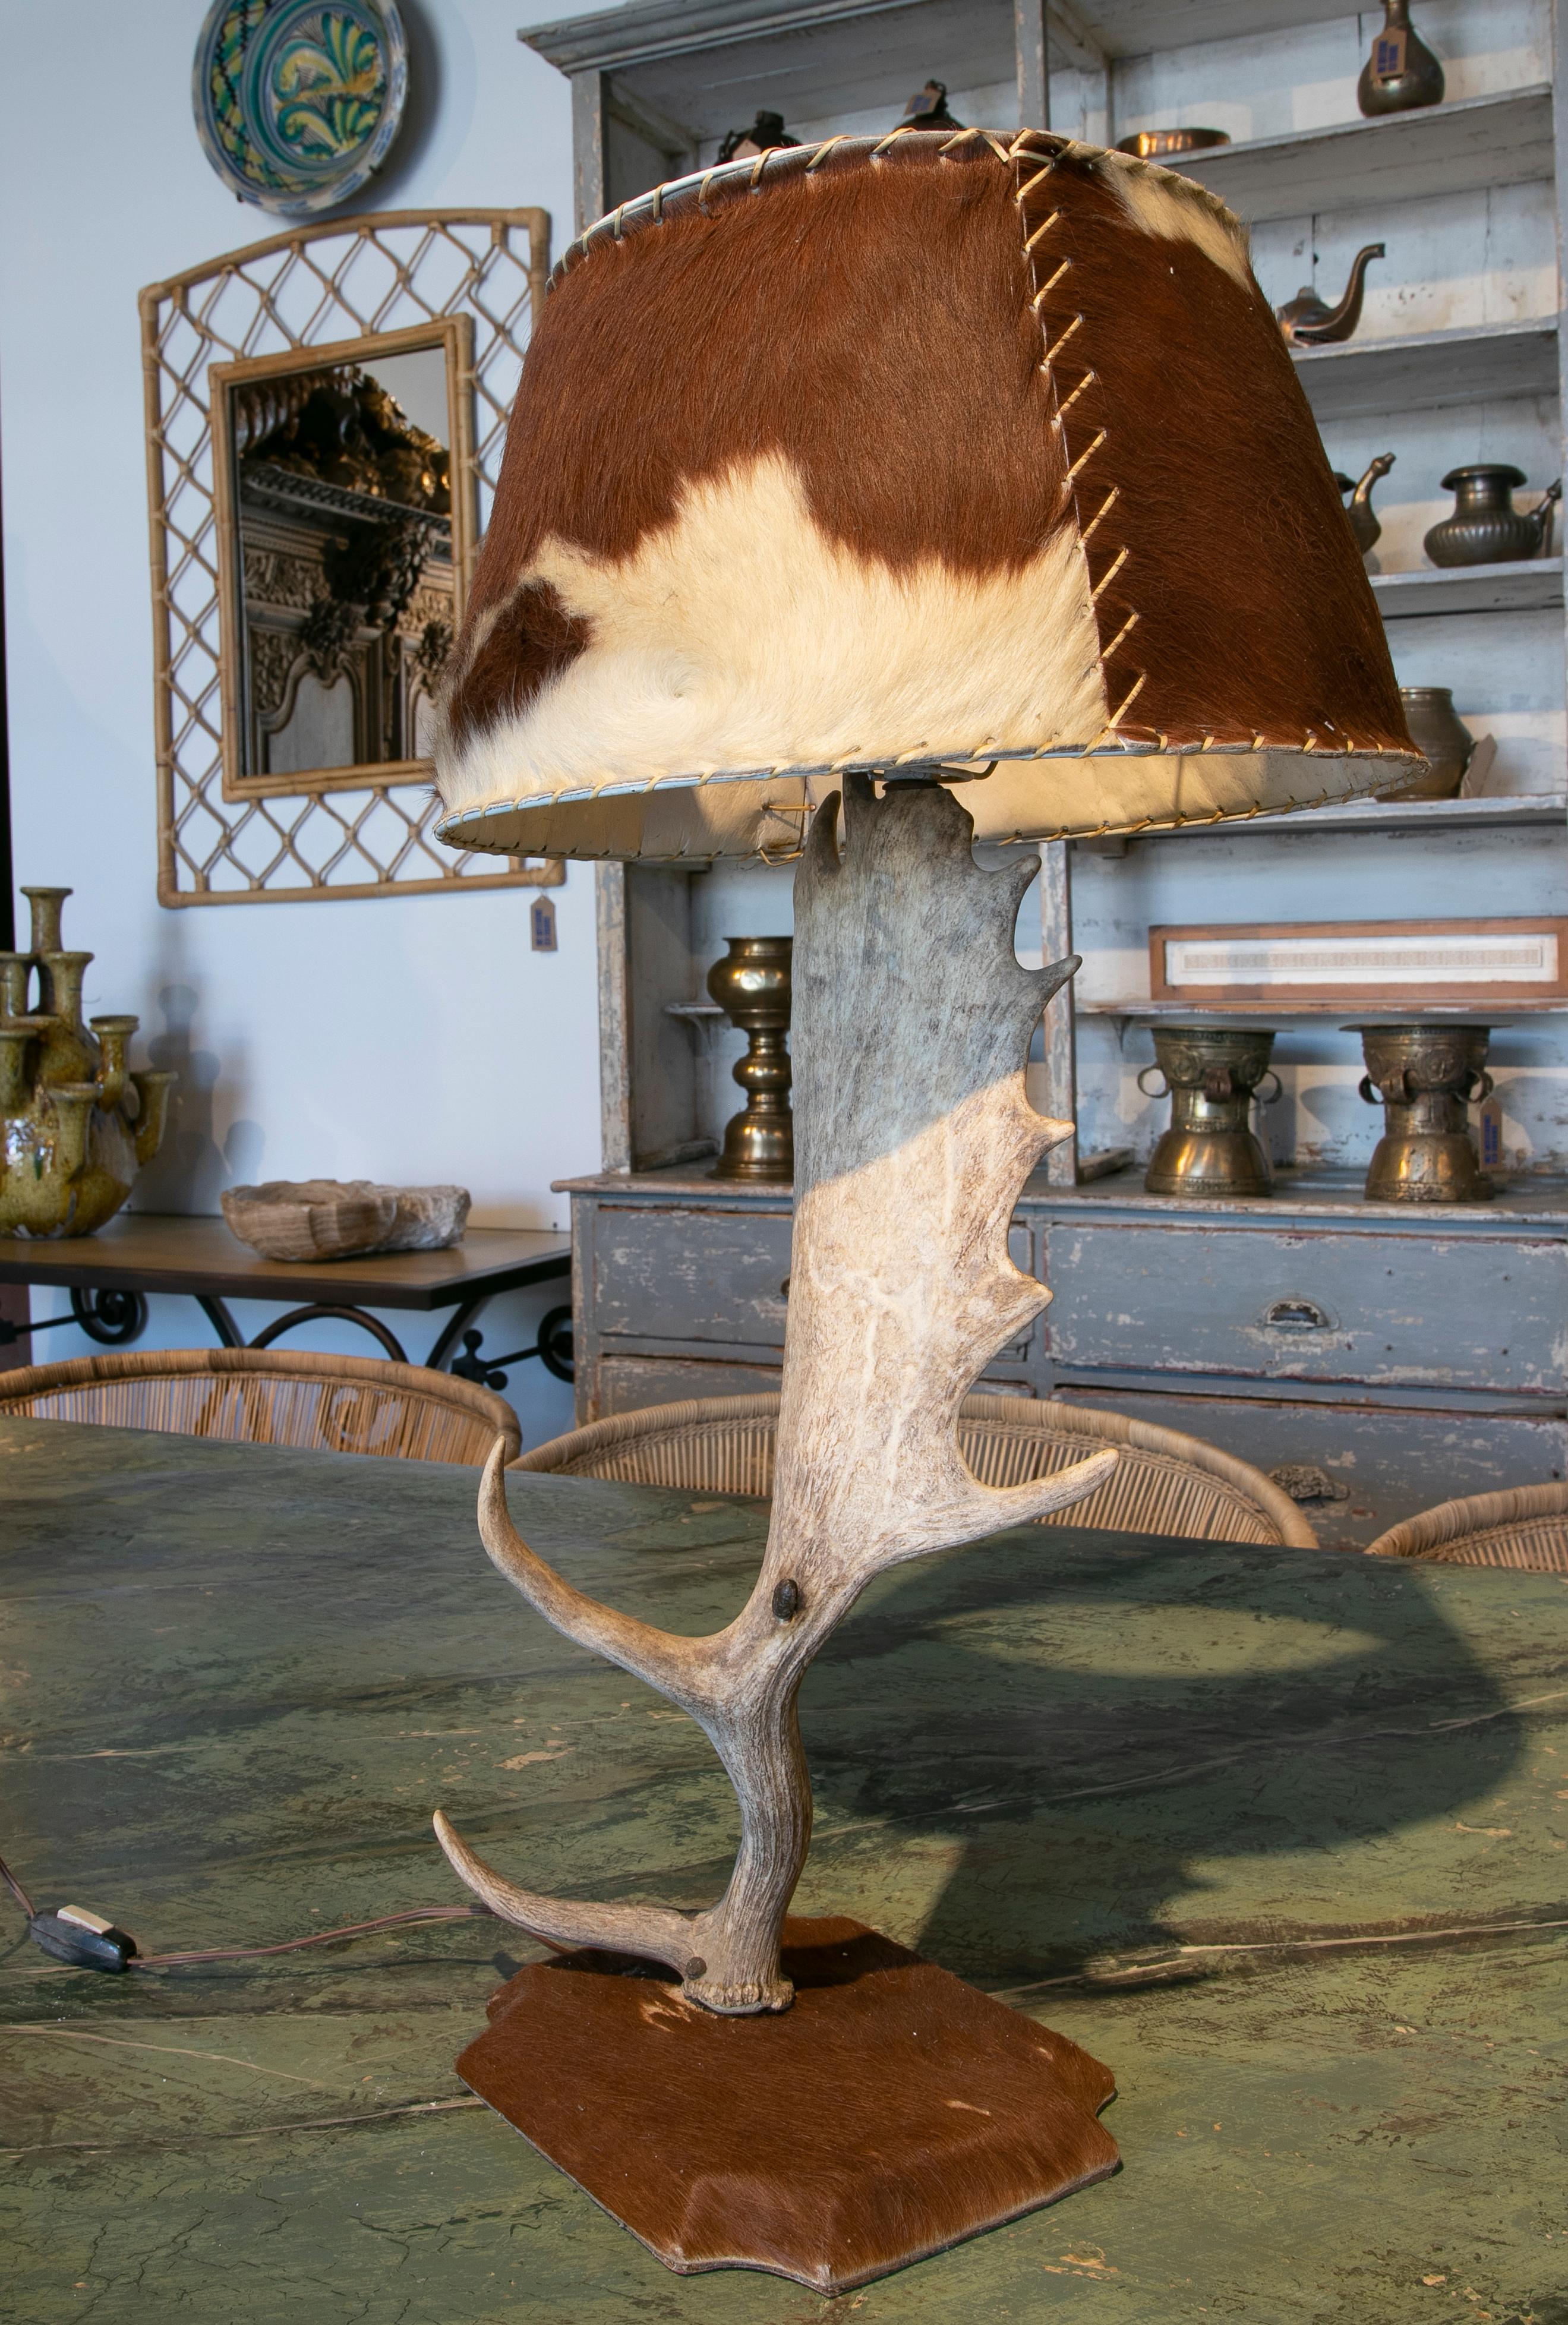 Table lamp made with an antler and deer leather used for the base and shade.